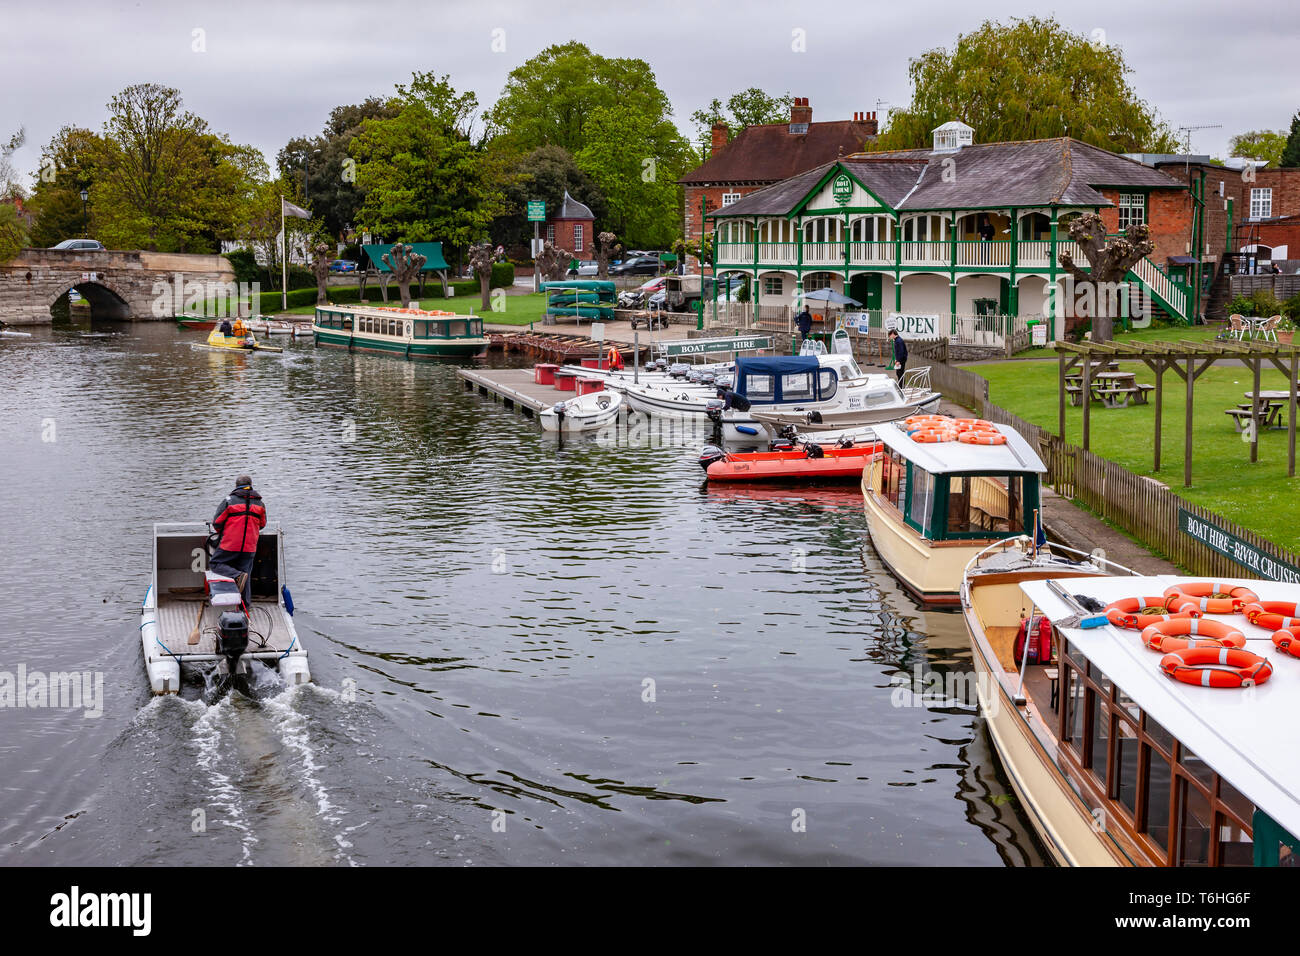 The Boat House on the river Avon at Stratford upon Avon, Warwickshire, West Midlands. Stock Photo